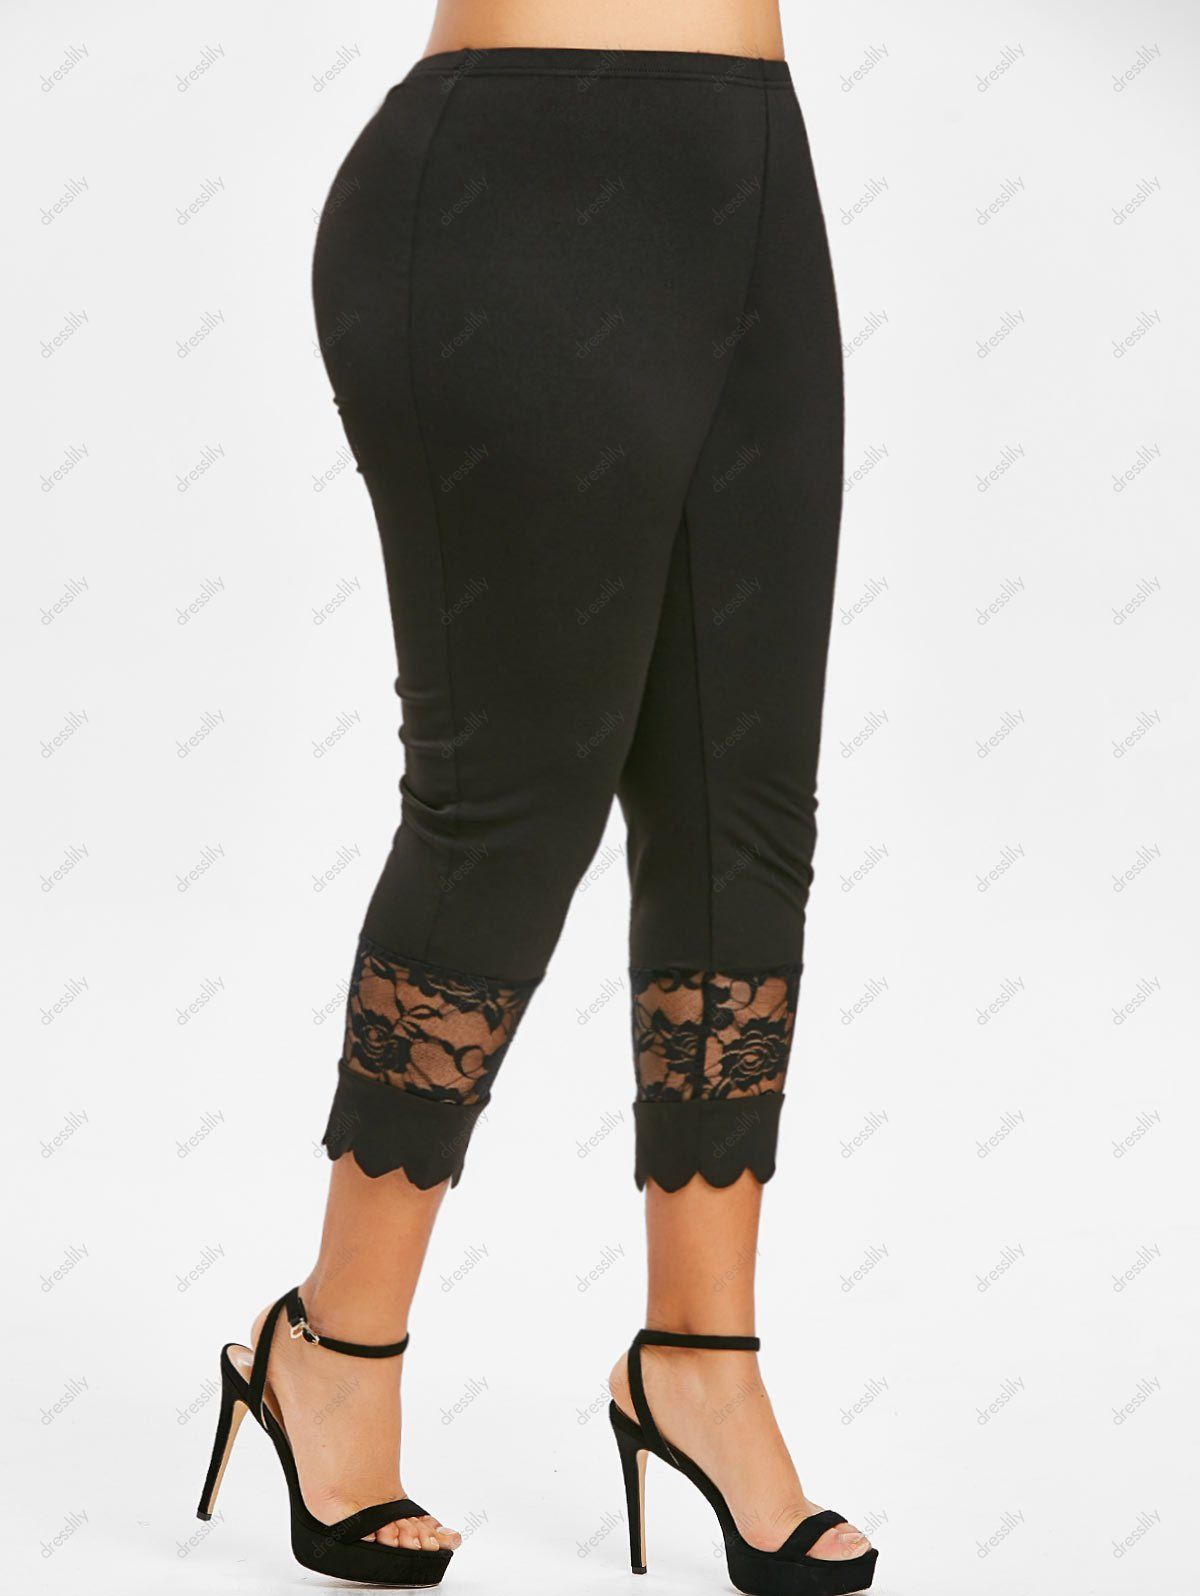 [37% OFF] 2020 Plus Size Cropped Lace Panel Leggings In BLACK | DressLily